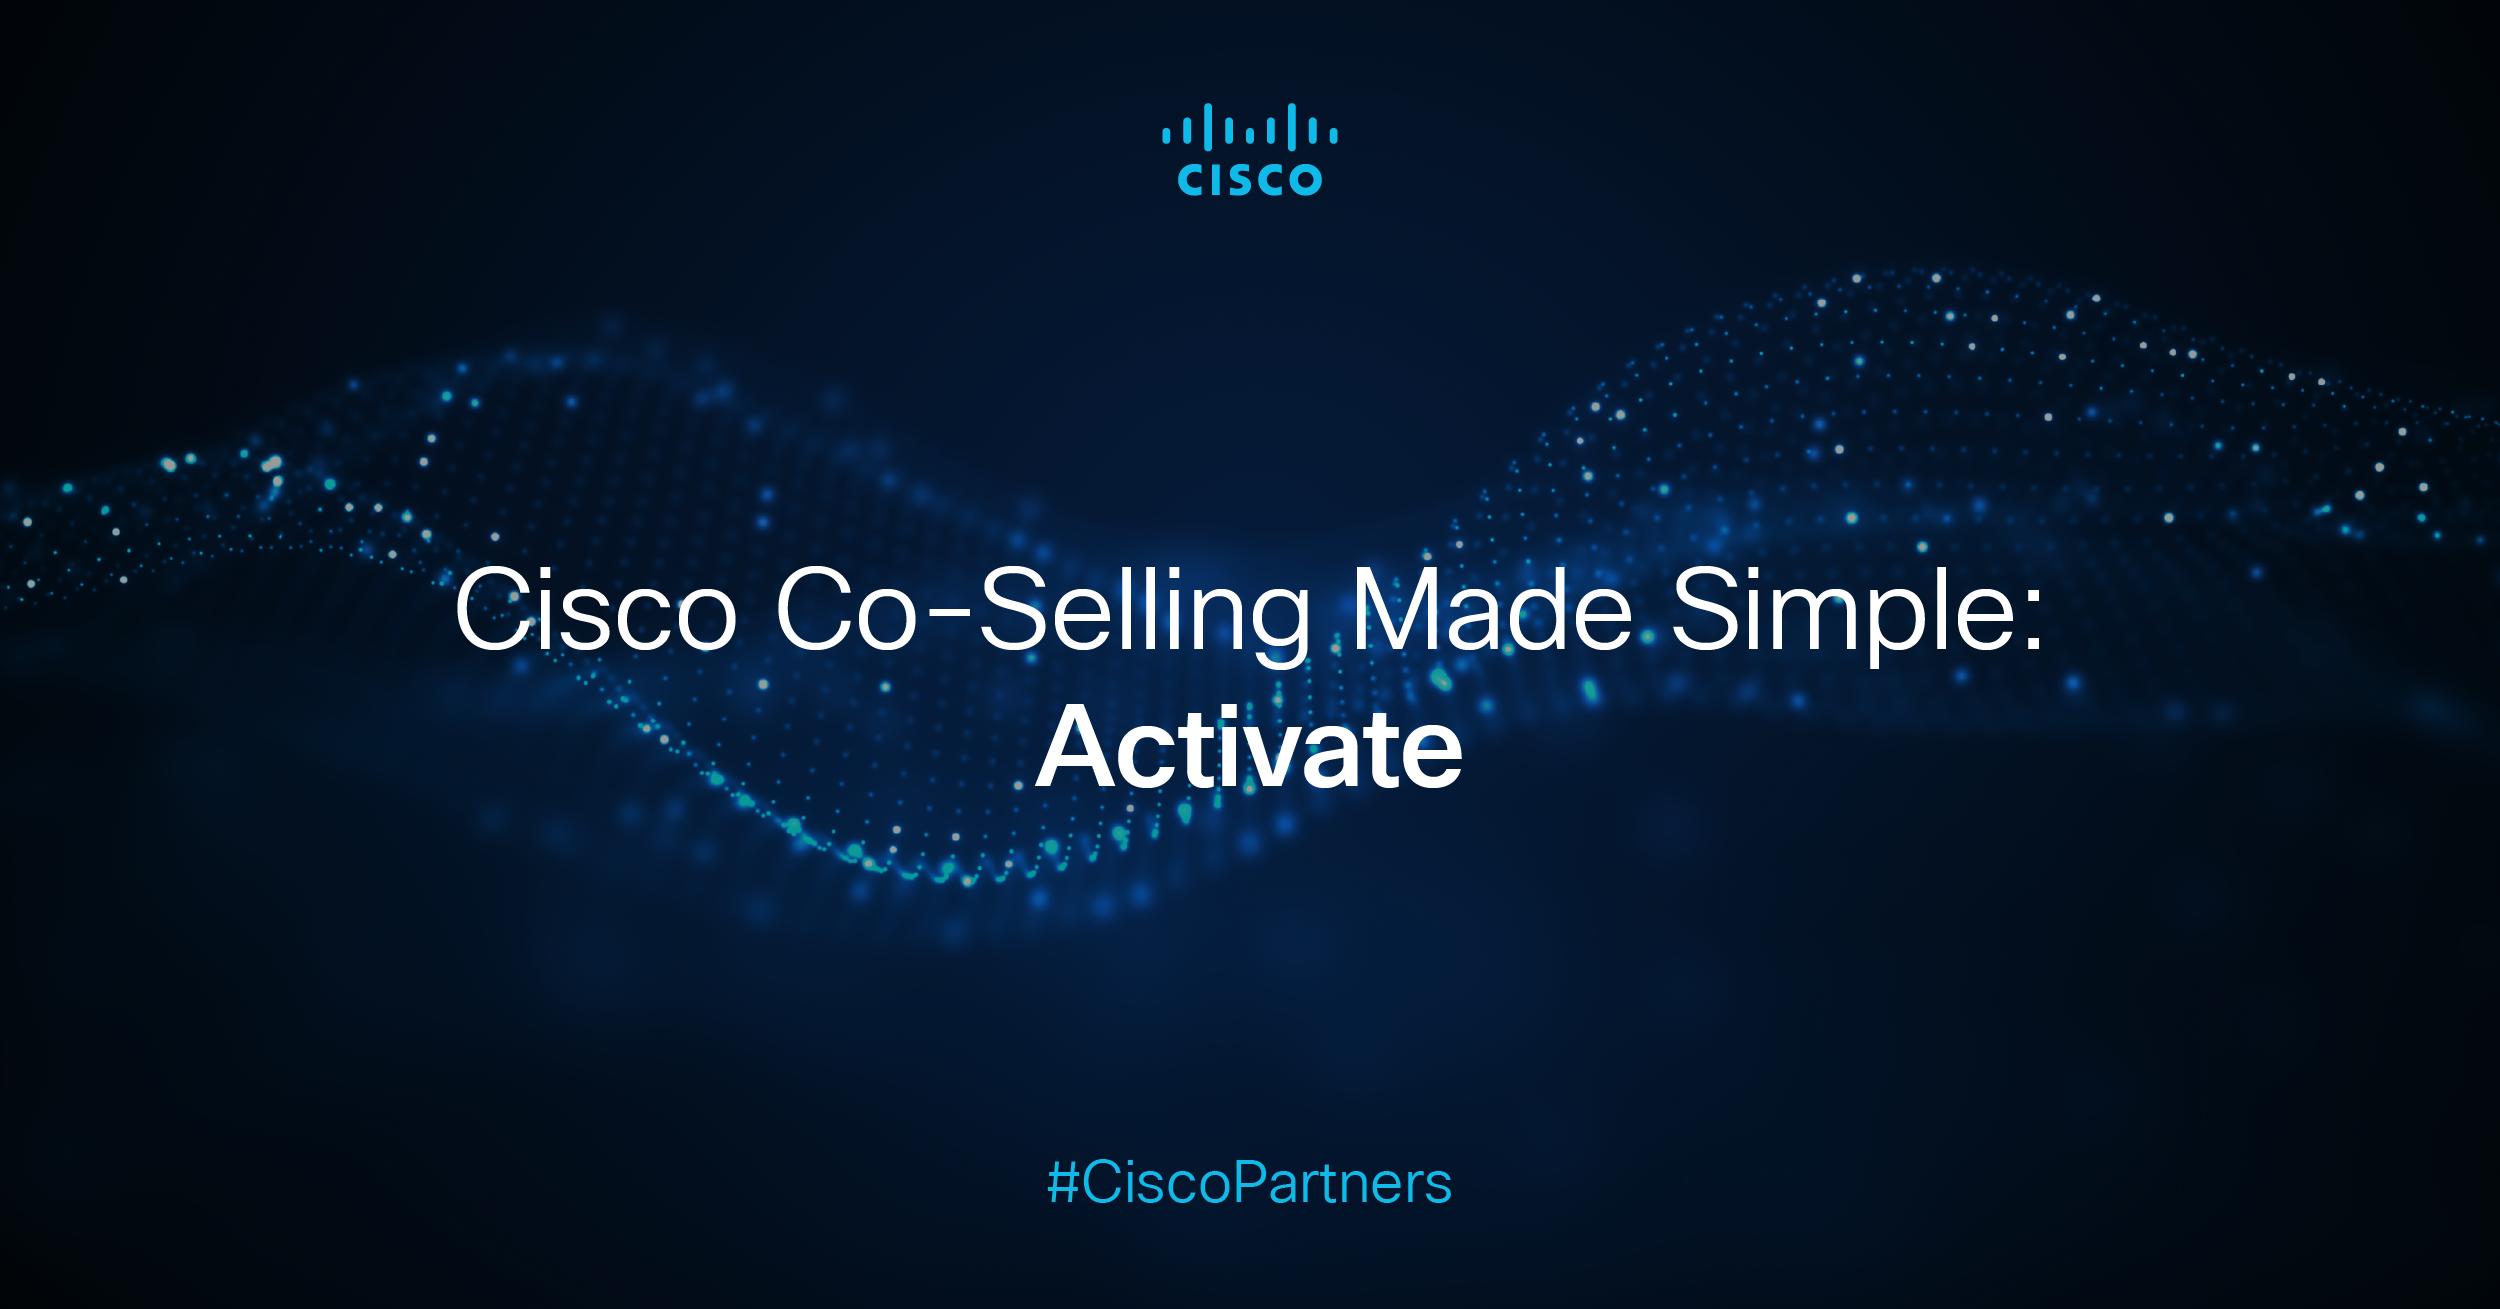 Cisco Co-Selling Made Simple: Activate